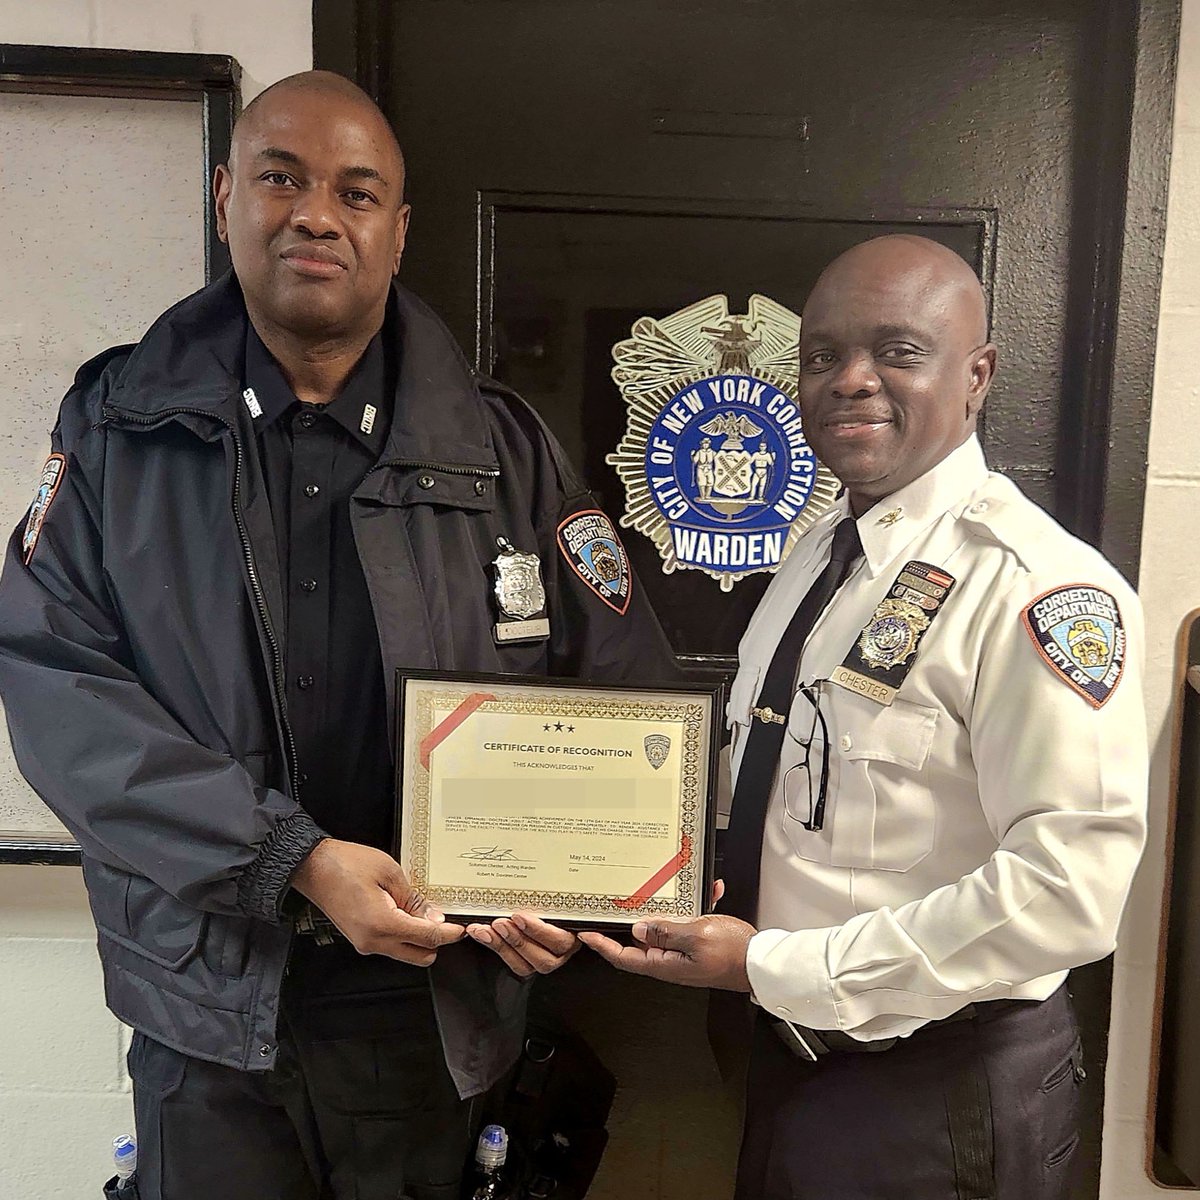 Join us today in sending a heartfelt thank you for your service to #DOC Officer Docteur for saving a person in custody’s life on #RikersIsland earlier this week. Learn more at bit.ly/4bLq0rj. #JoinTheBoldest